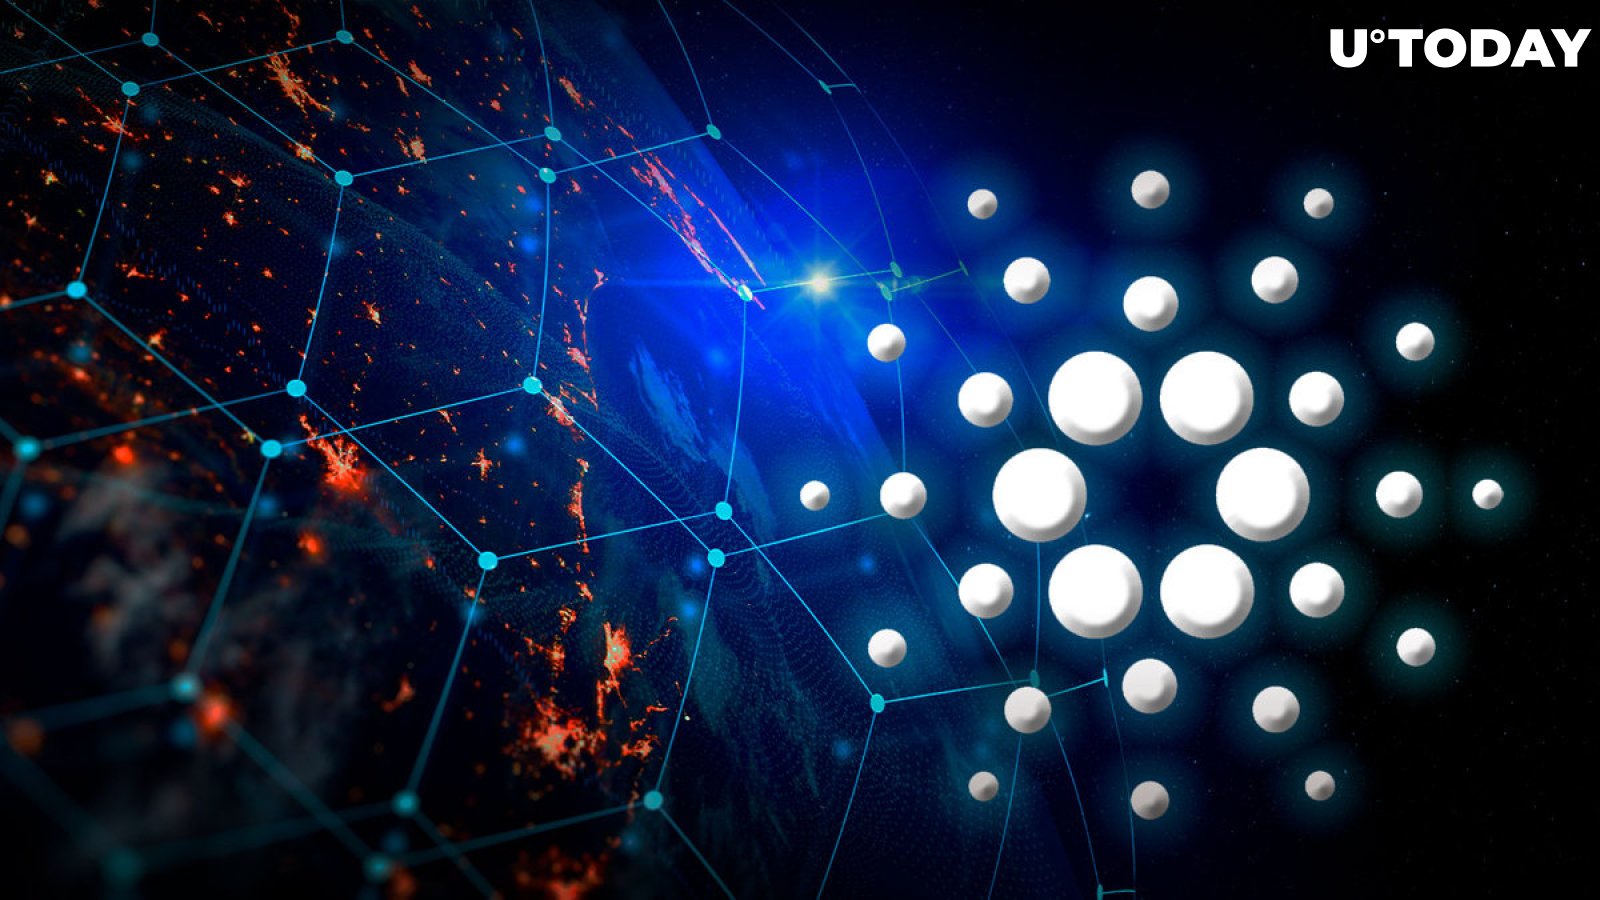 Cardano Celebrates More Than 1,000 Actively Developed Projects on Network